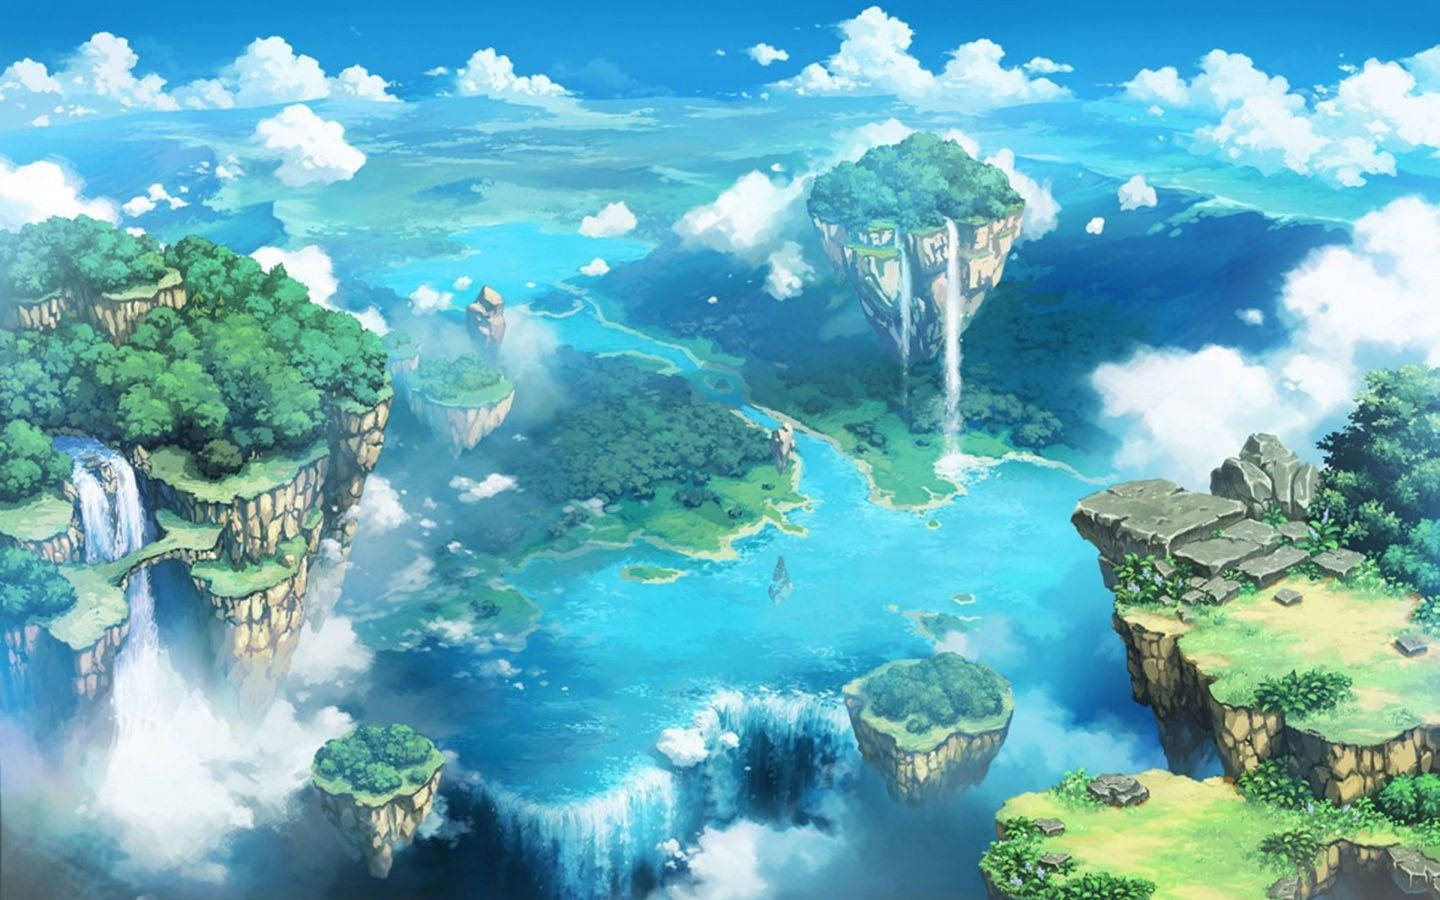 Floating Villages Anime Scenery Background